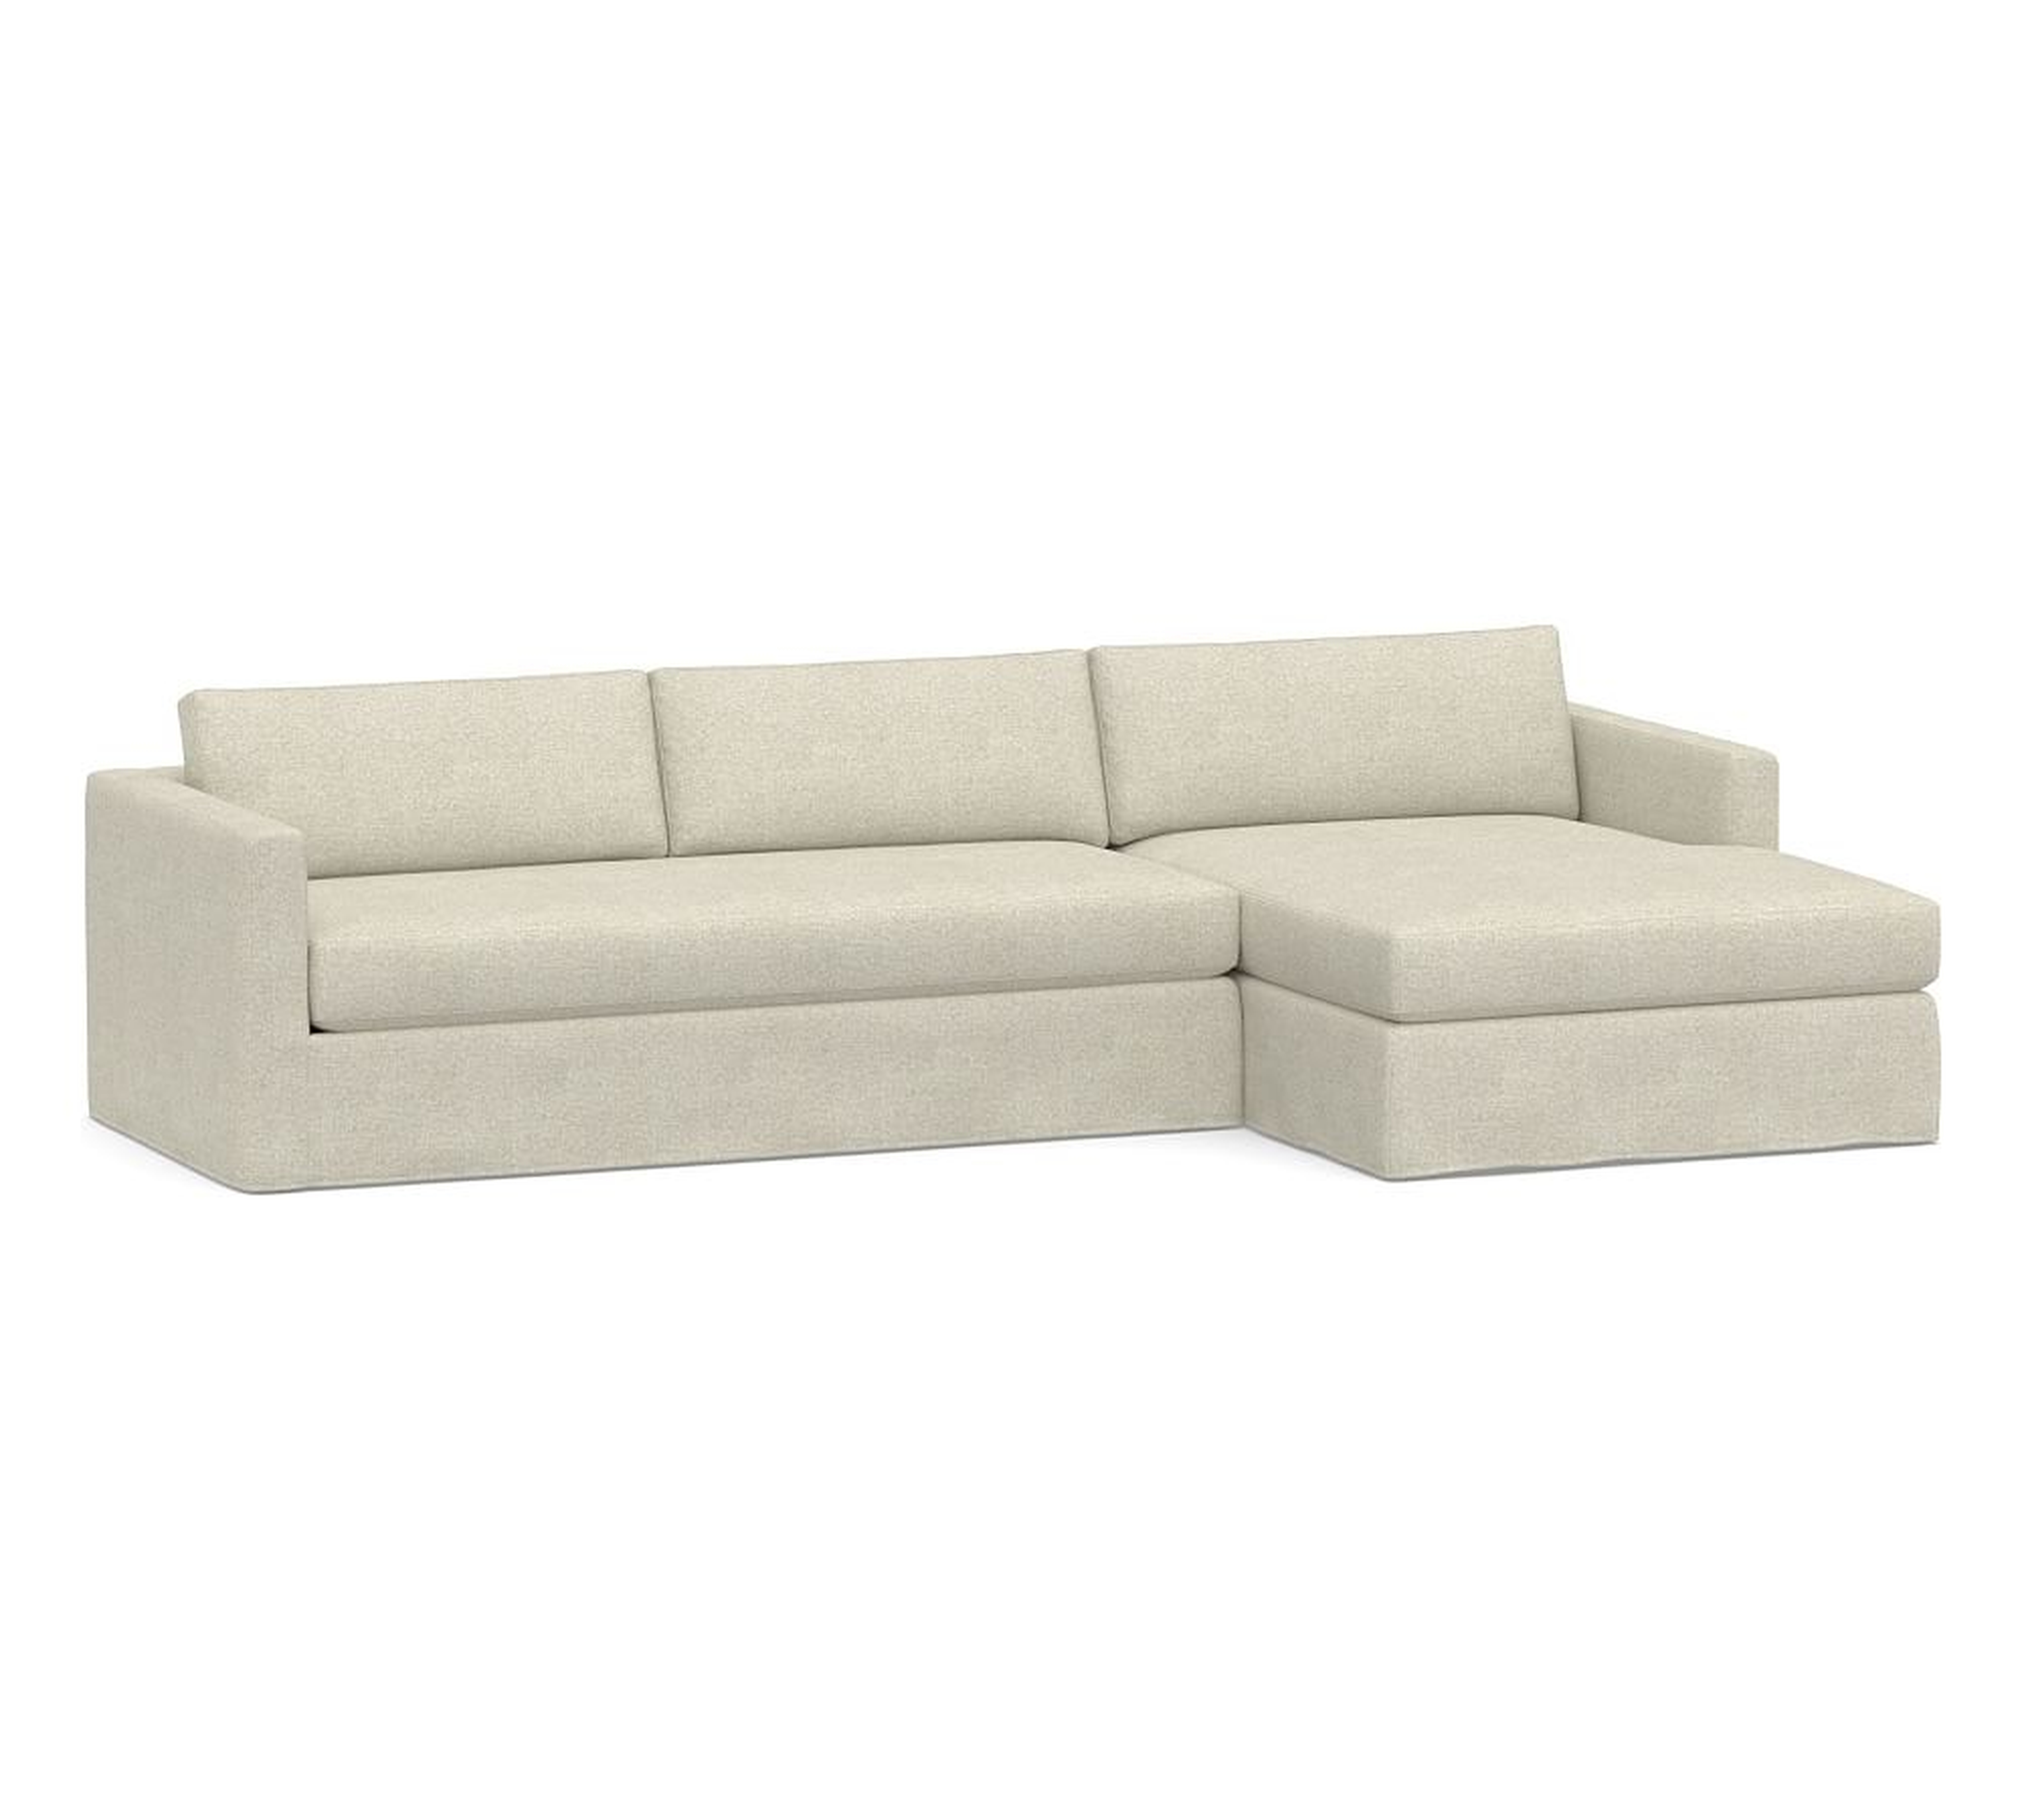 Carmel Slim Square Arm Slipcovered Left Arm Sofa with Wide Chaise Sectional and Bench Cushion, Down Blend Wrapped Cushions, Performance Heathered Basketweave Alabaster White - Pottery Barn